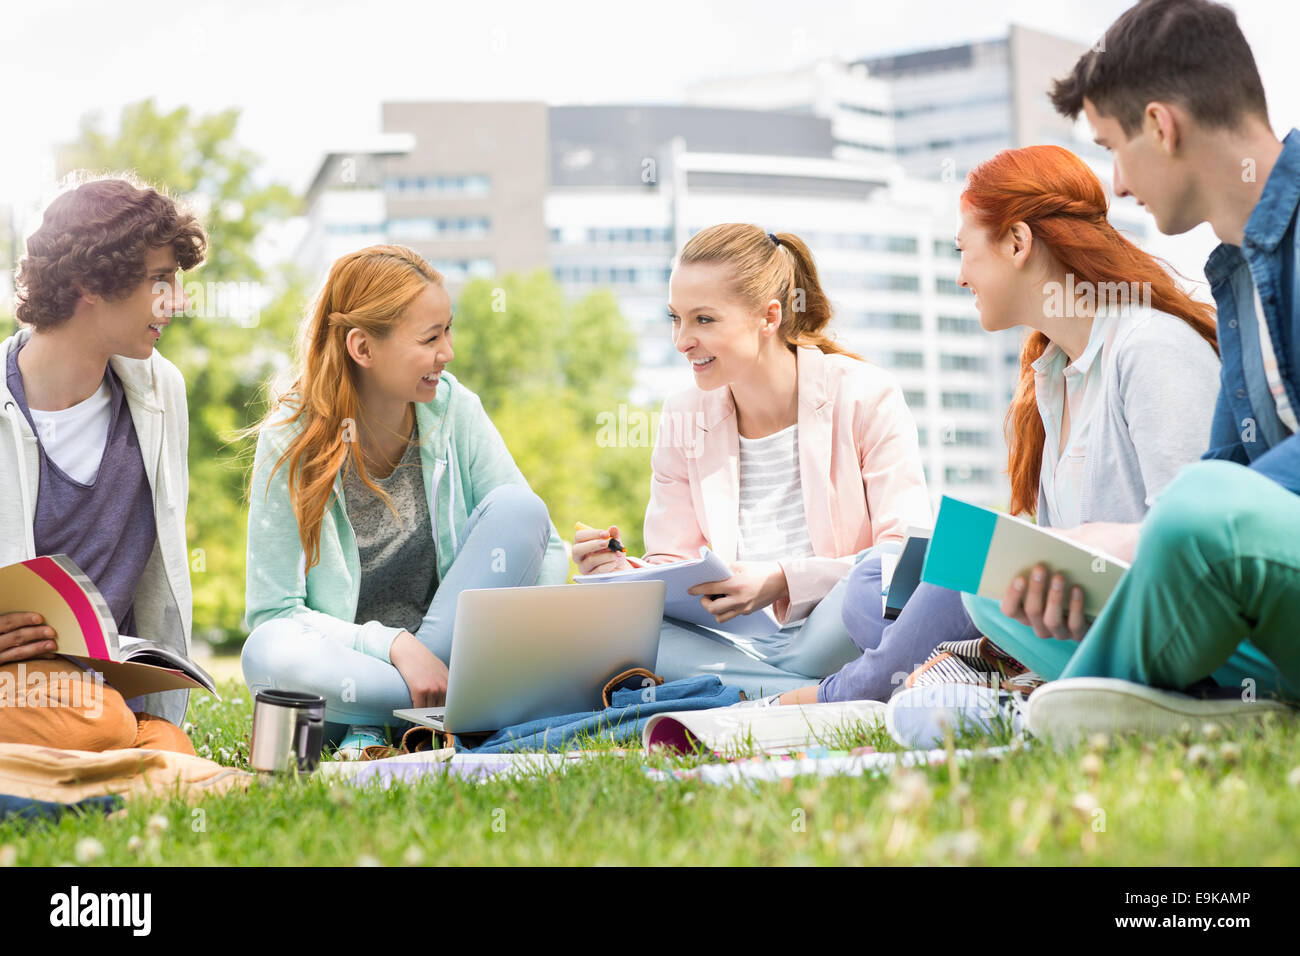 University students studying together on grass Stock Photo